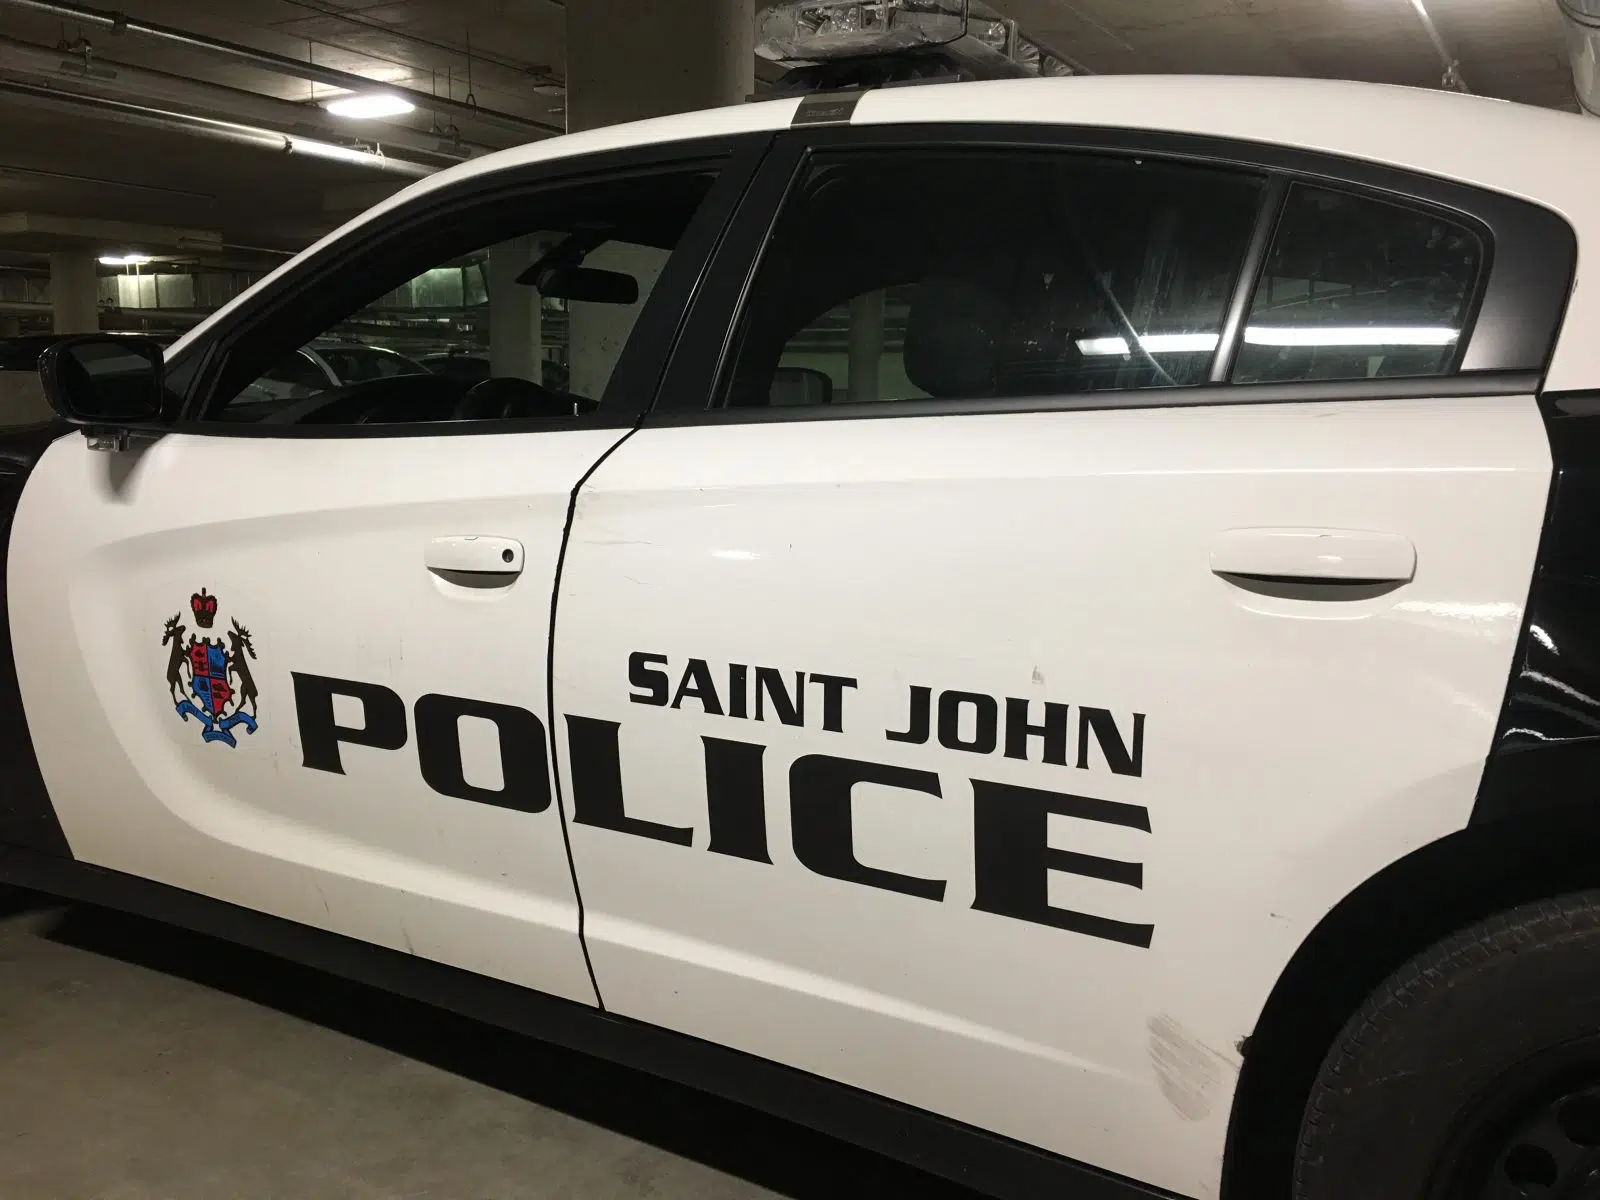 Saint John police conduct vehicle safety campaign